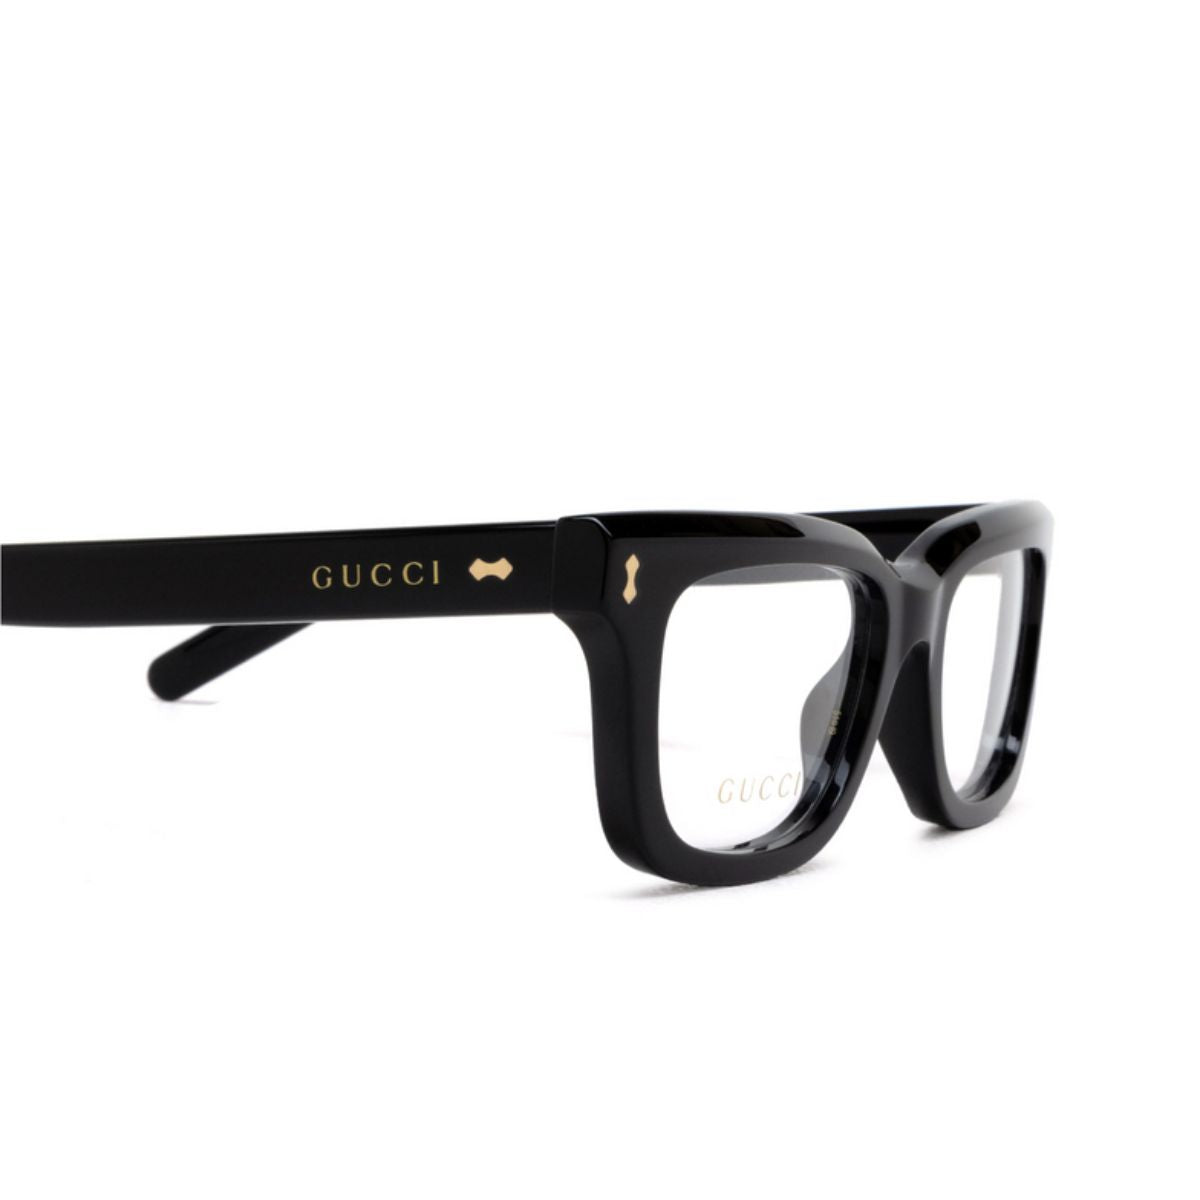  "Luxury Eyewear by Gucci - 1522O 001 men's frames, for those who appreciate meticulous design and luxury."